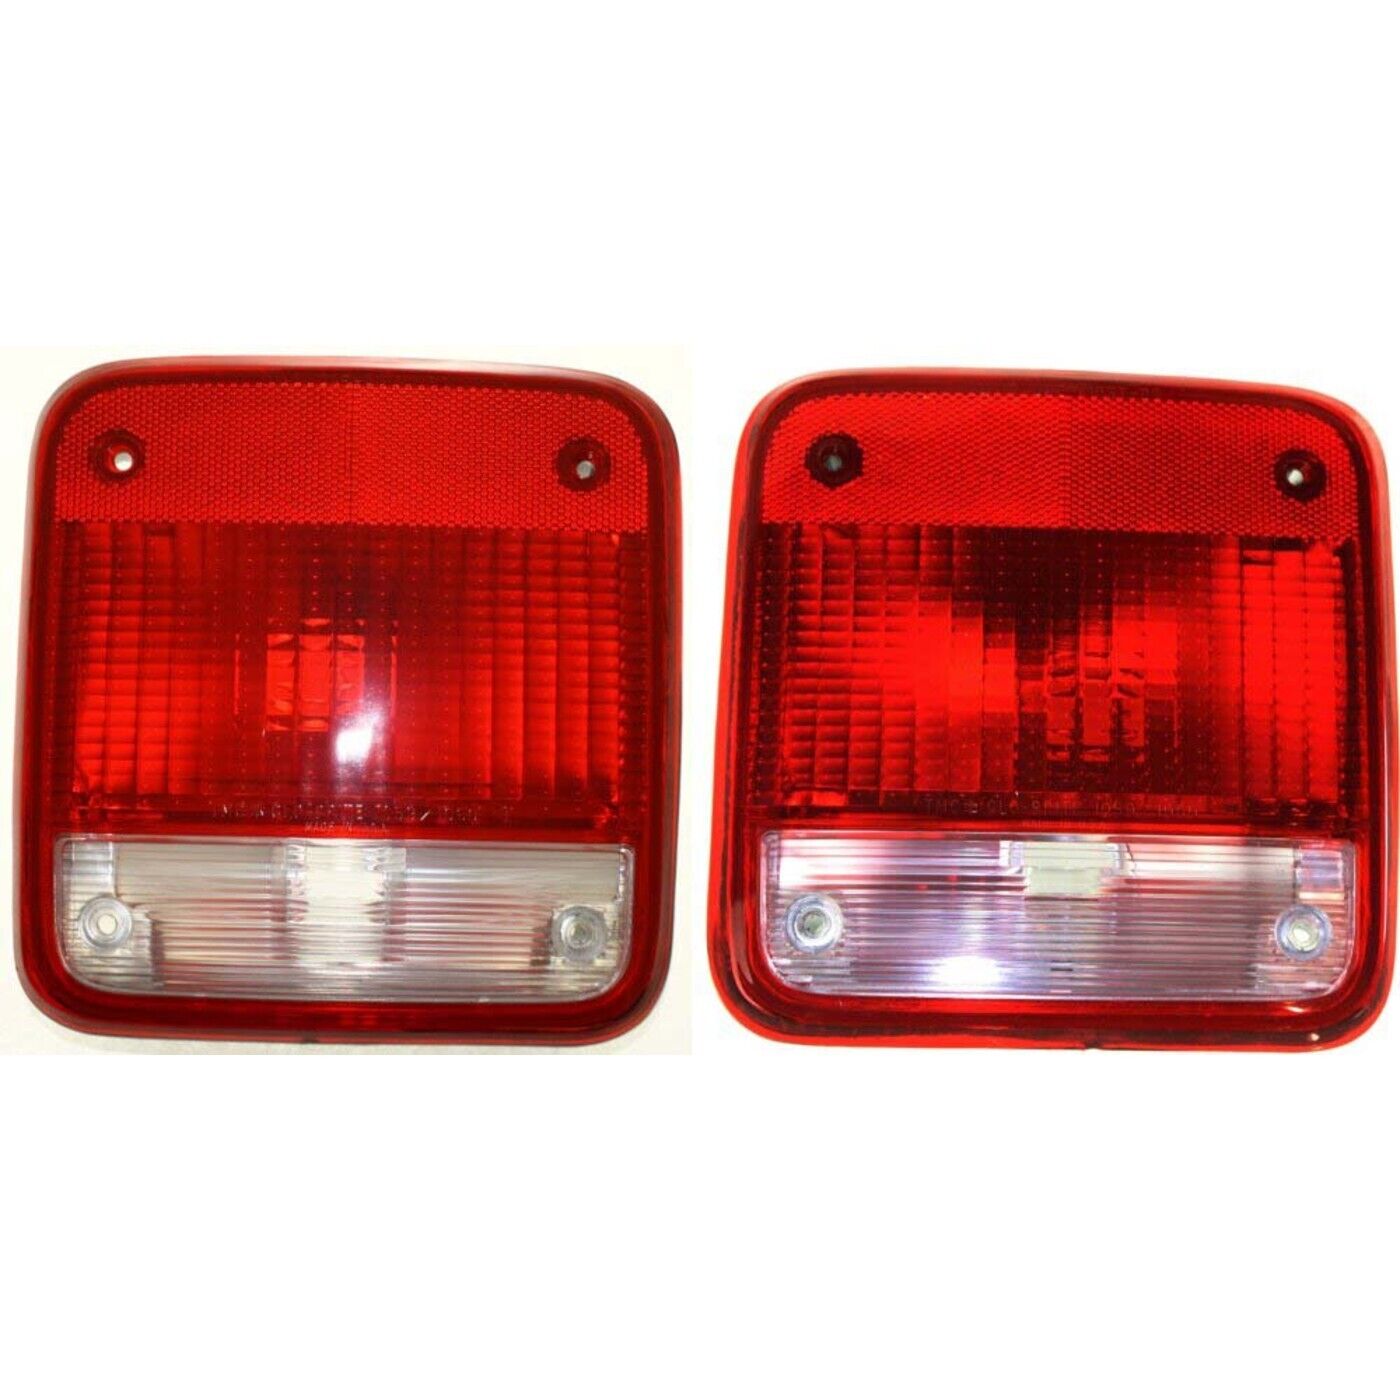 Tail Lights Taillights Taillamps Brakelights Set of 2  Driver & Passenger Pair